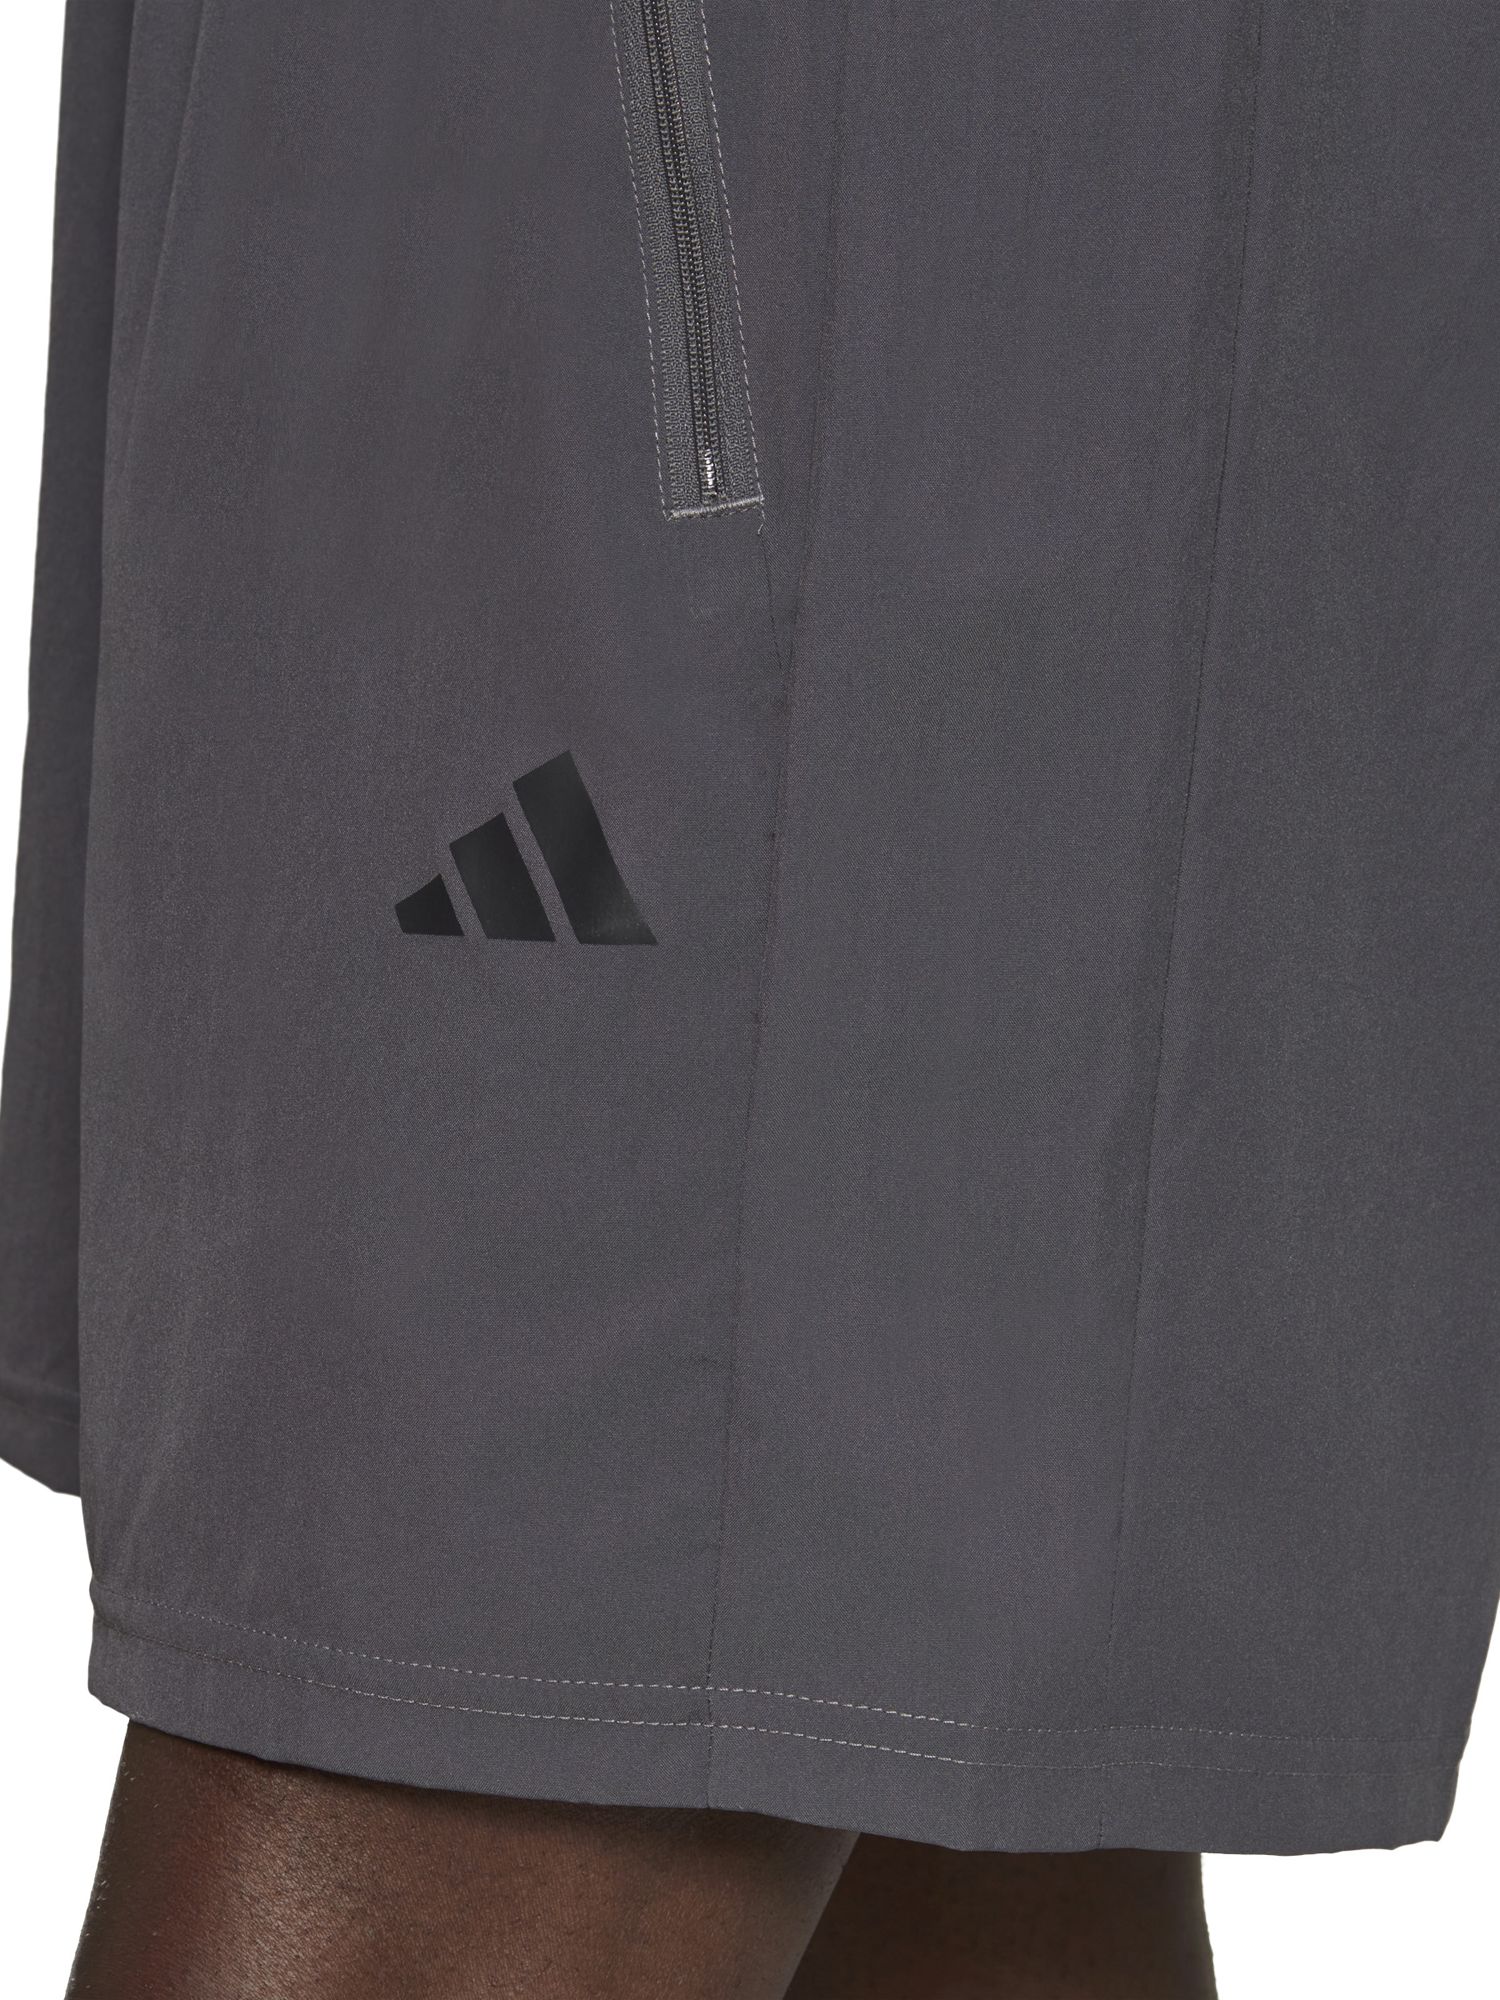 adidas Train Essentials Woven Recycled Gym Shorts, Grey Five/Black, S